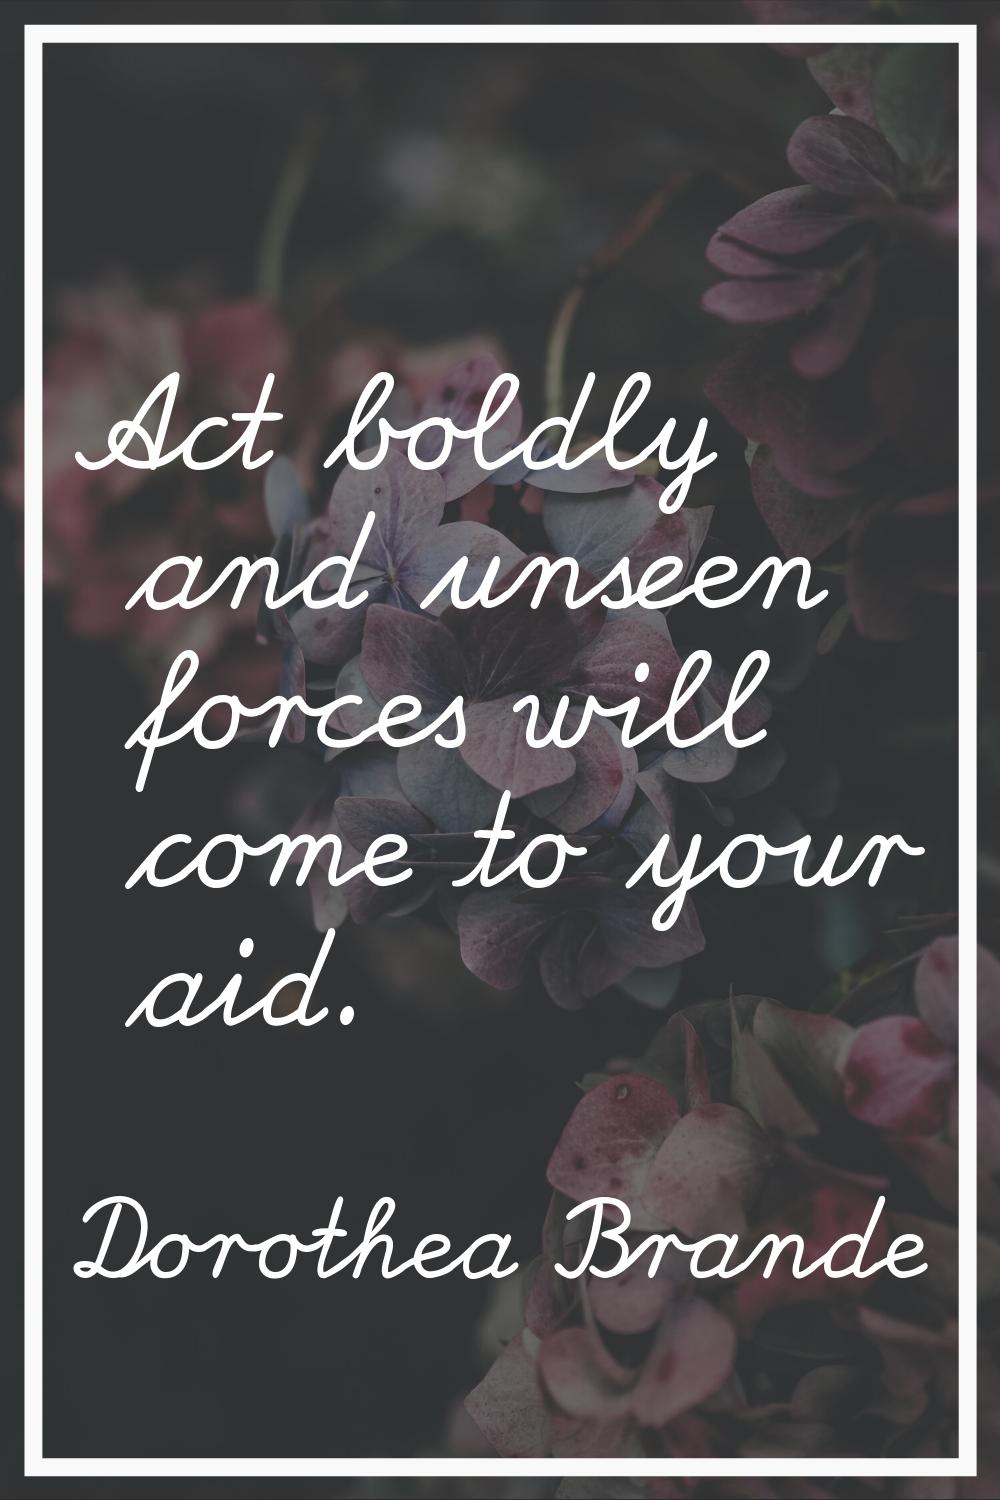 Act boldly and unseen forces will come to your aid.